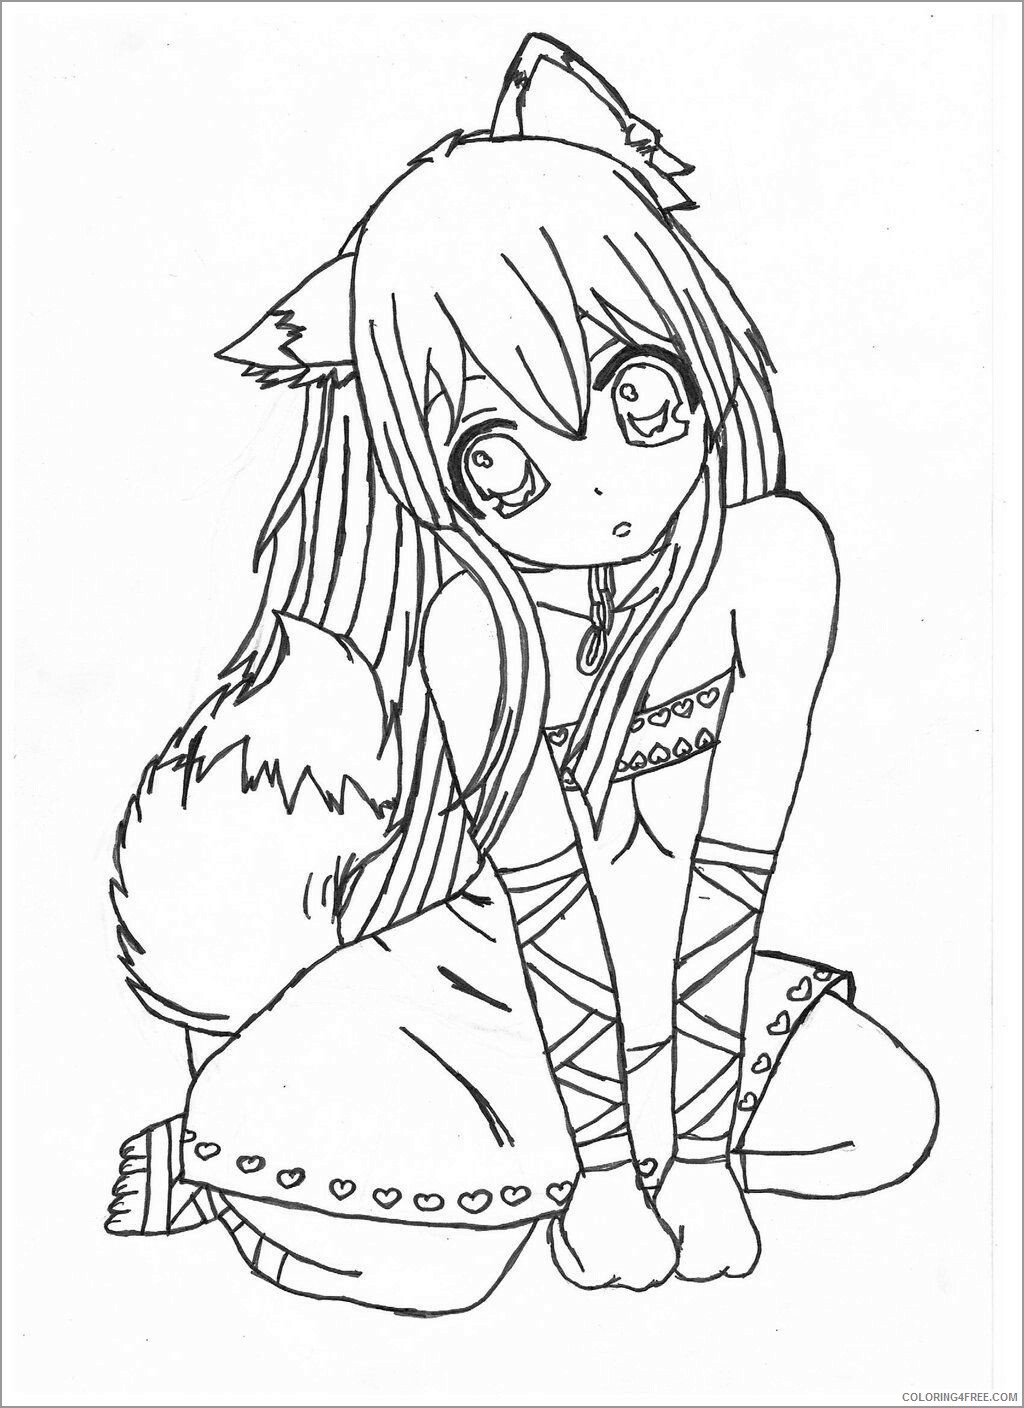 Girl Coloring Pages For Girls Cute Anime Girl Printable 21 0540 Coloring4free Coloring4free Com